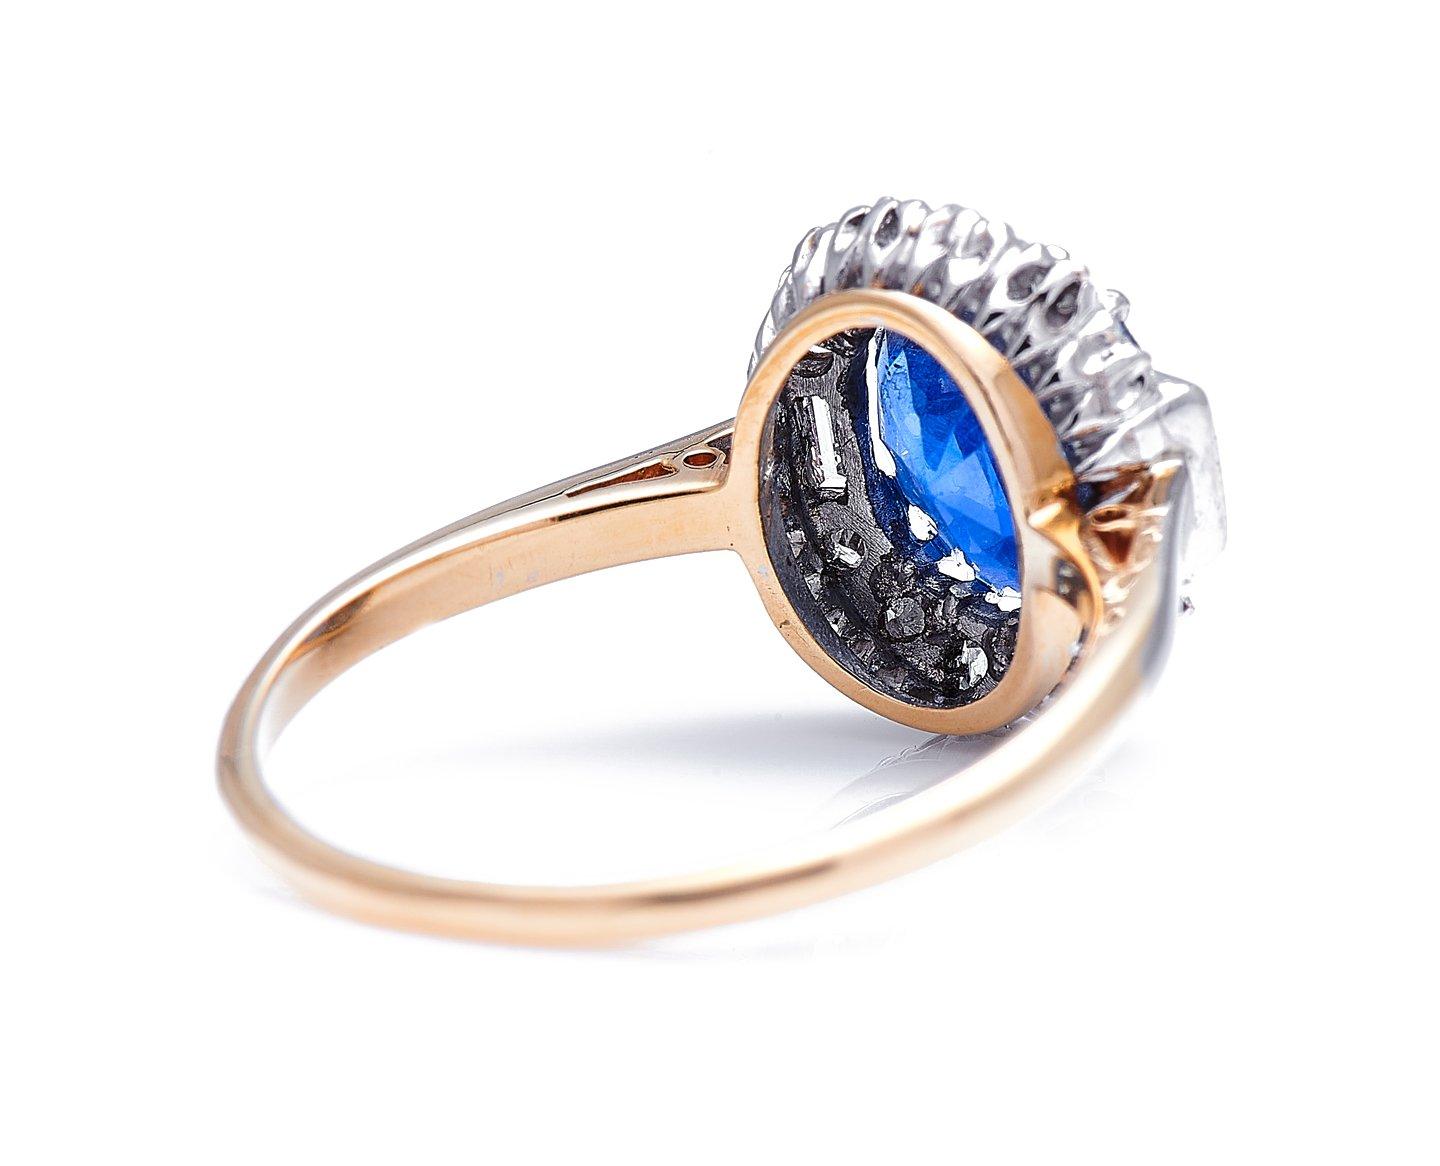 Antique, Art Deco, 18 Carat Gold, Burmese Sapphire and Diamond Cluster Ring In Excellent Condition For Sale In Rochford, Essex